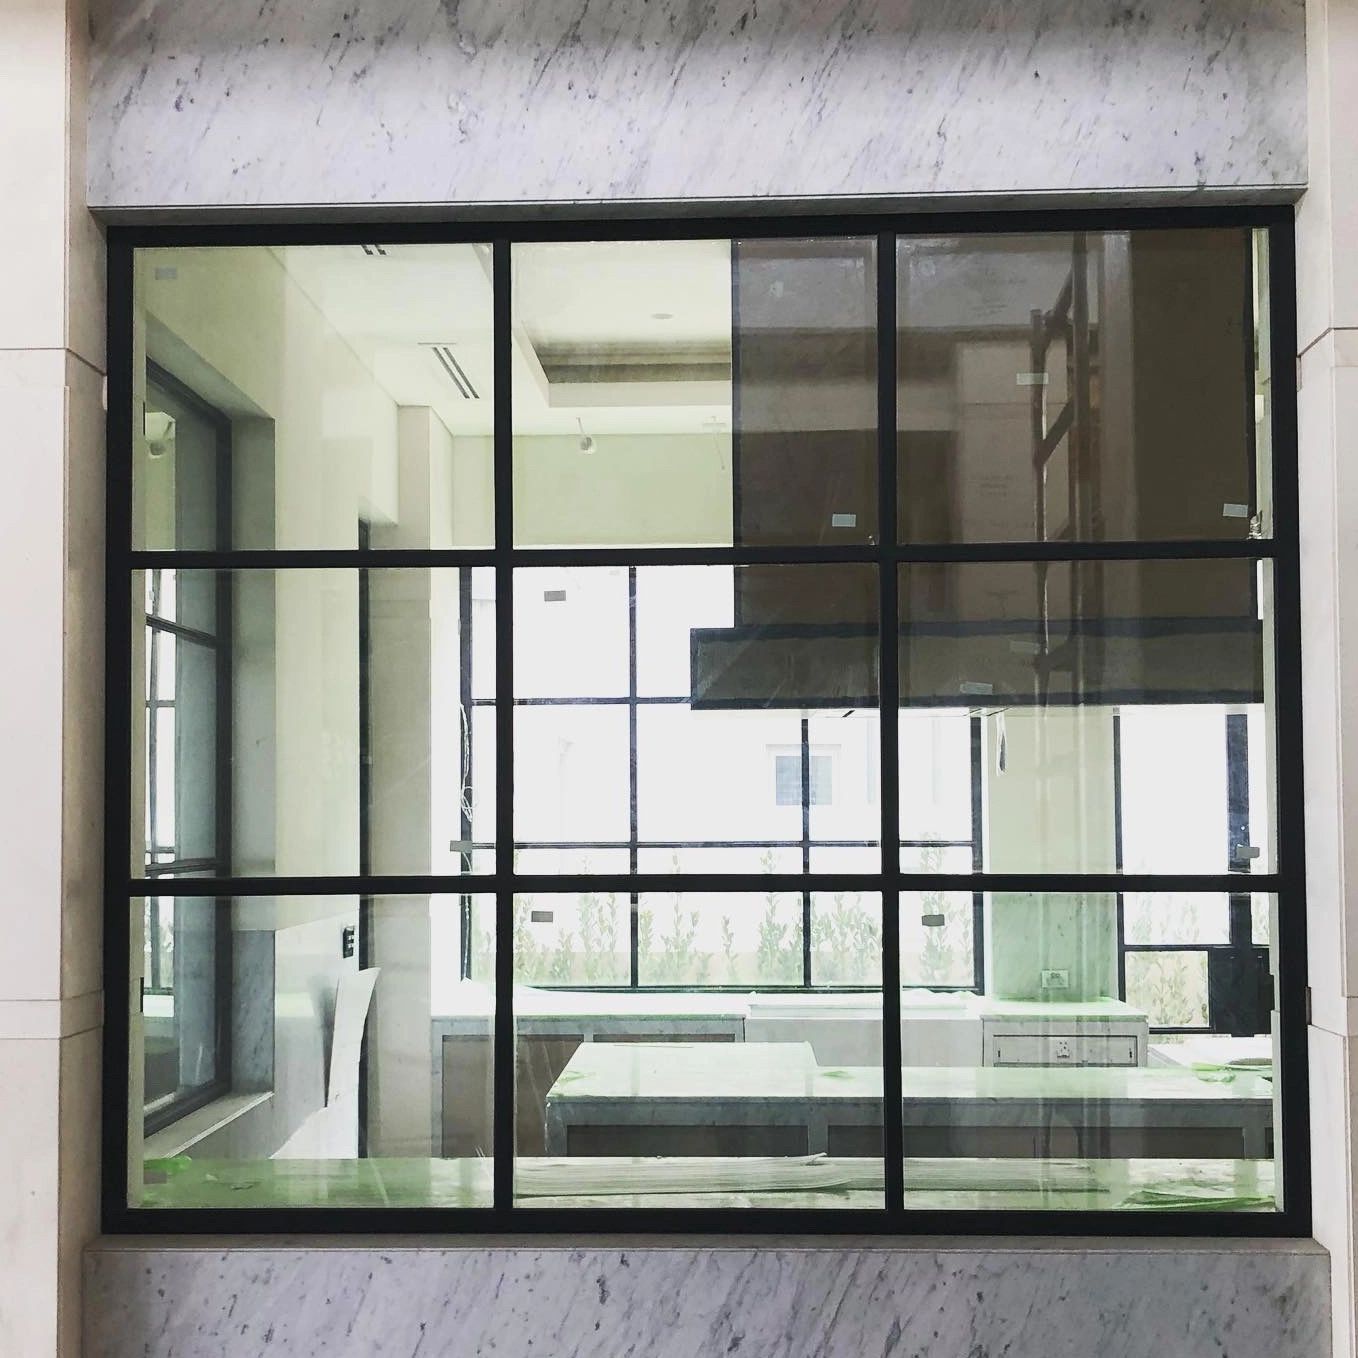 Quality G2 Steel Doors and Steel Windows project with fixed panel Steel Windows in Perth.